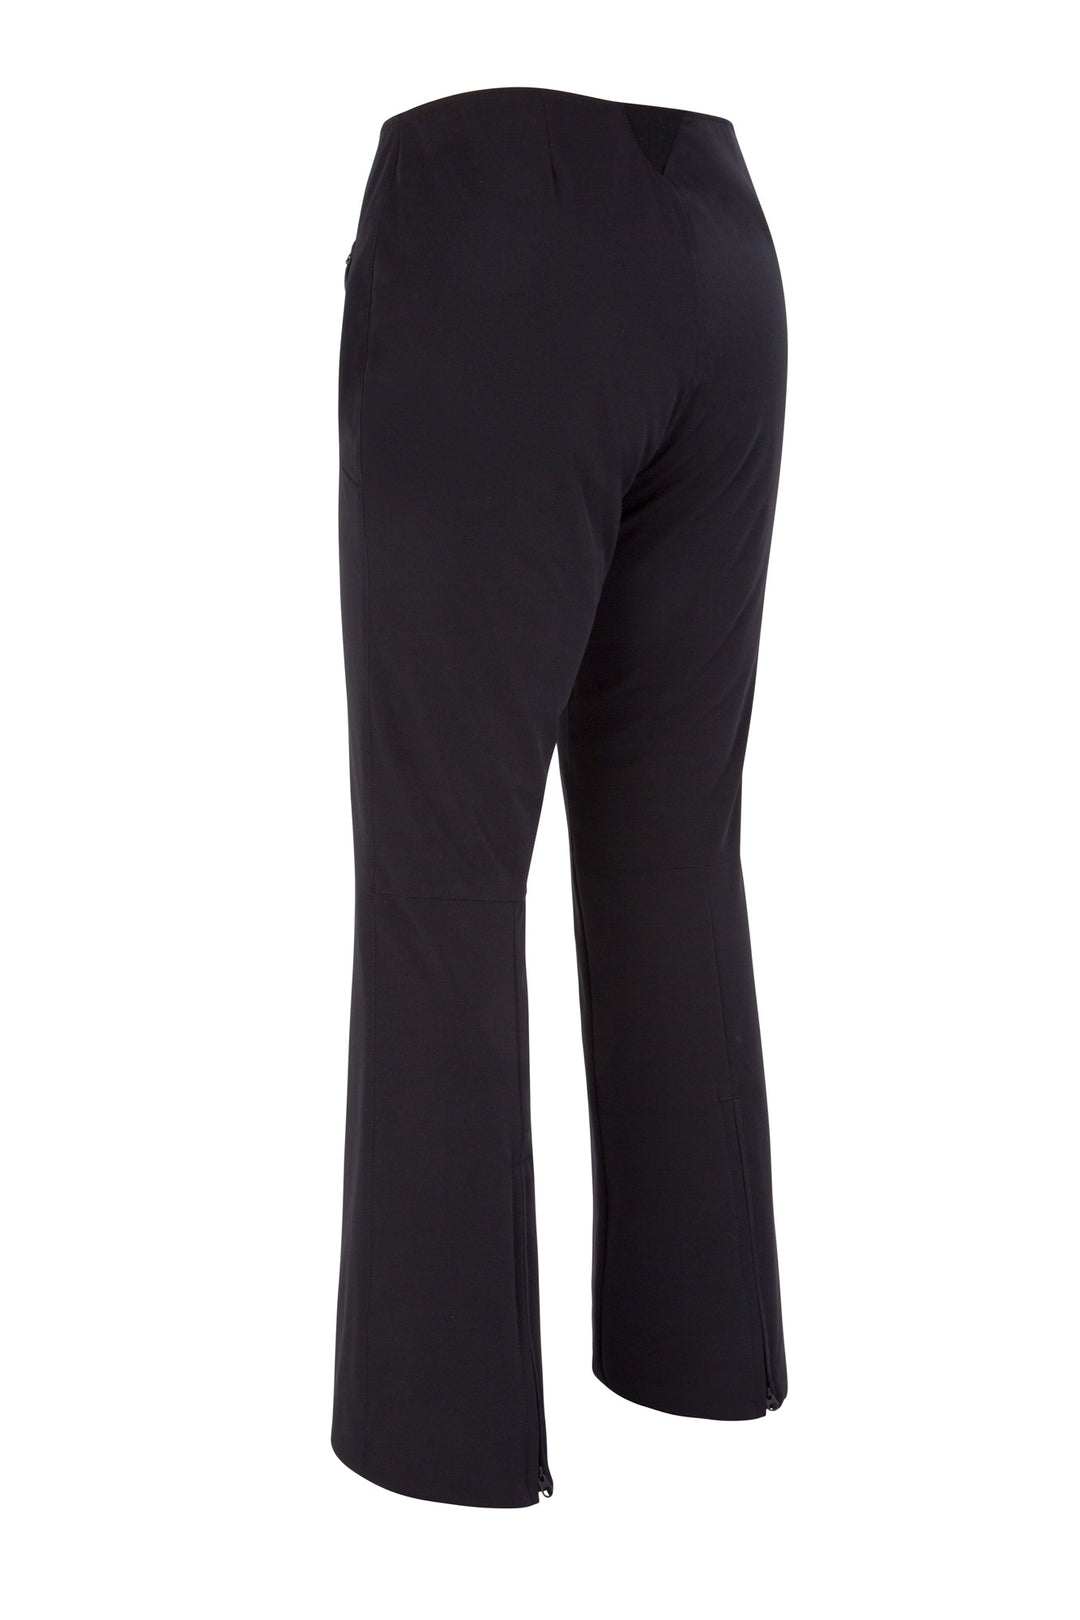 Heaven Stretch Insulated Pant X-Sizes